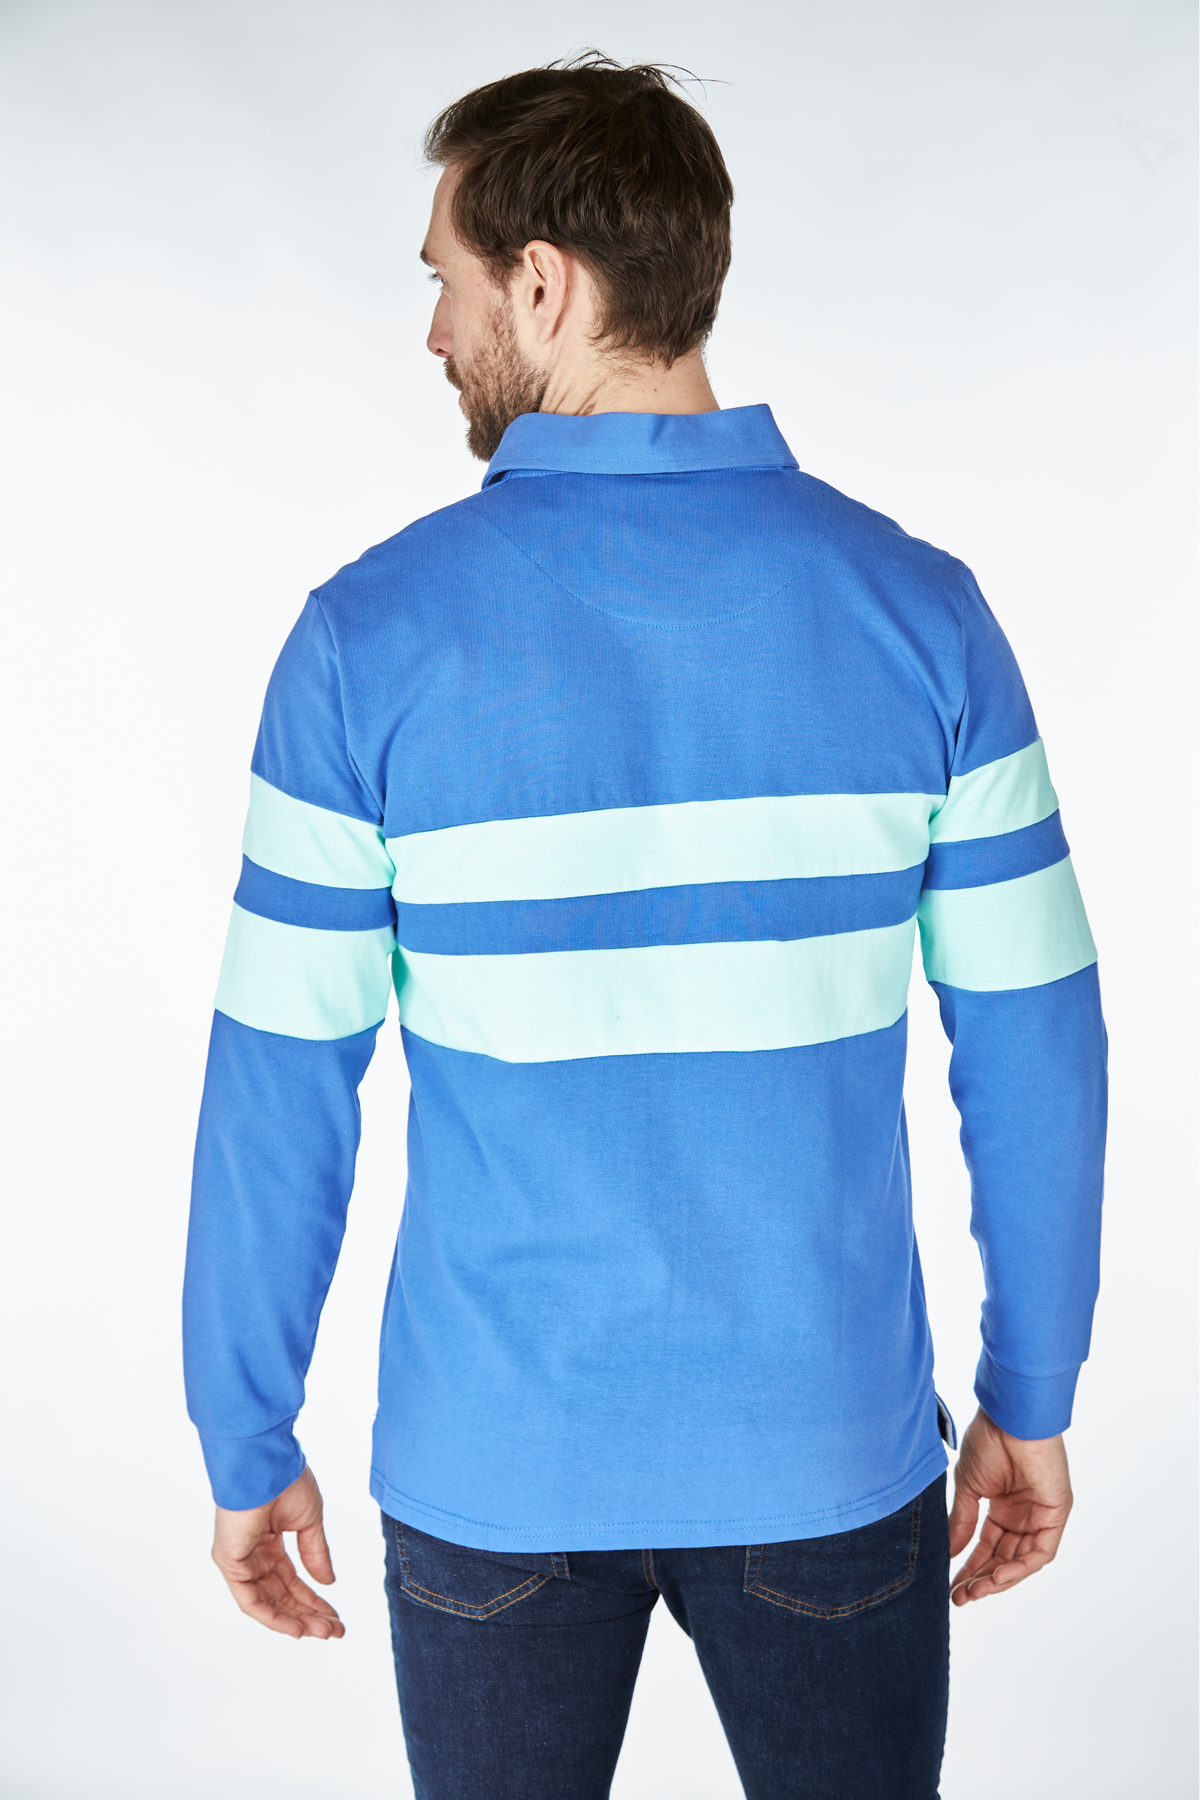 Holme Rugby Shirt - Blue - Whale Of A Time Clothing